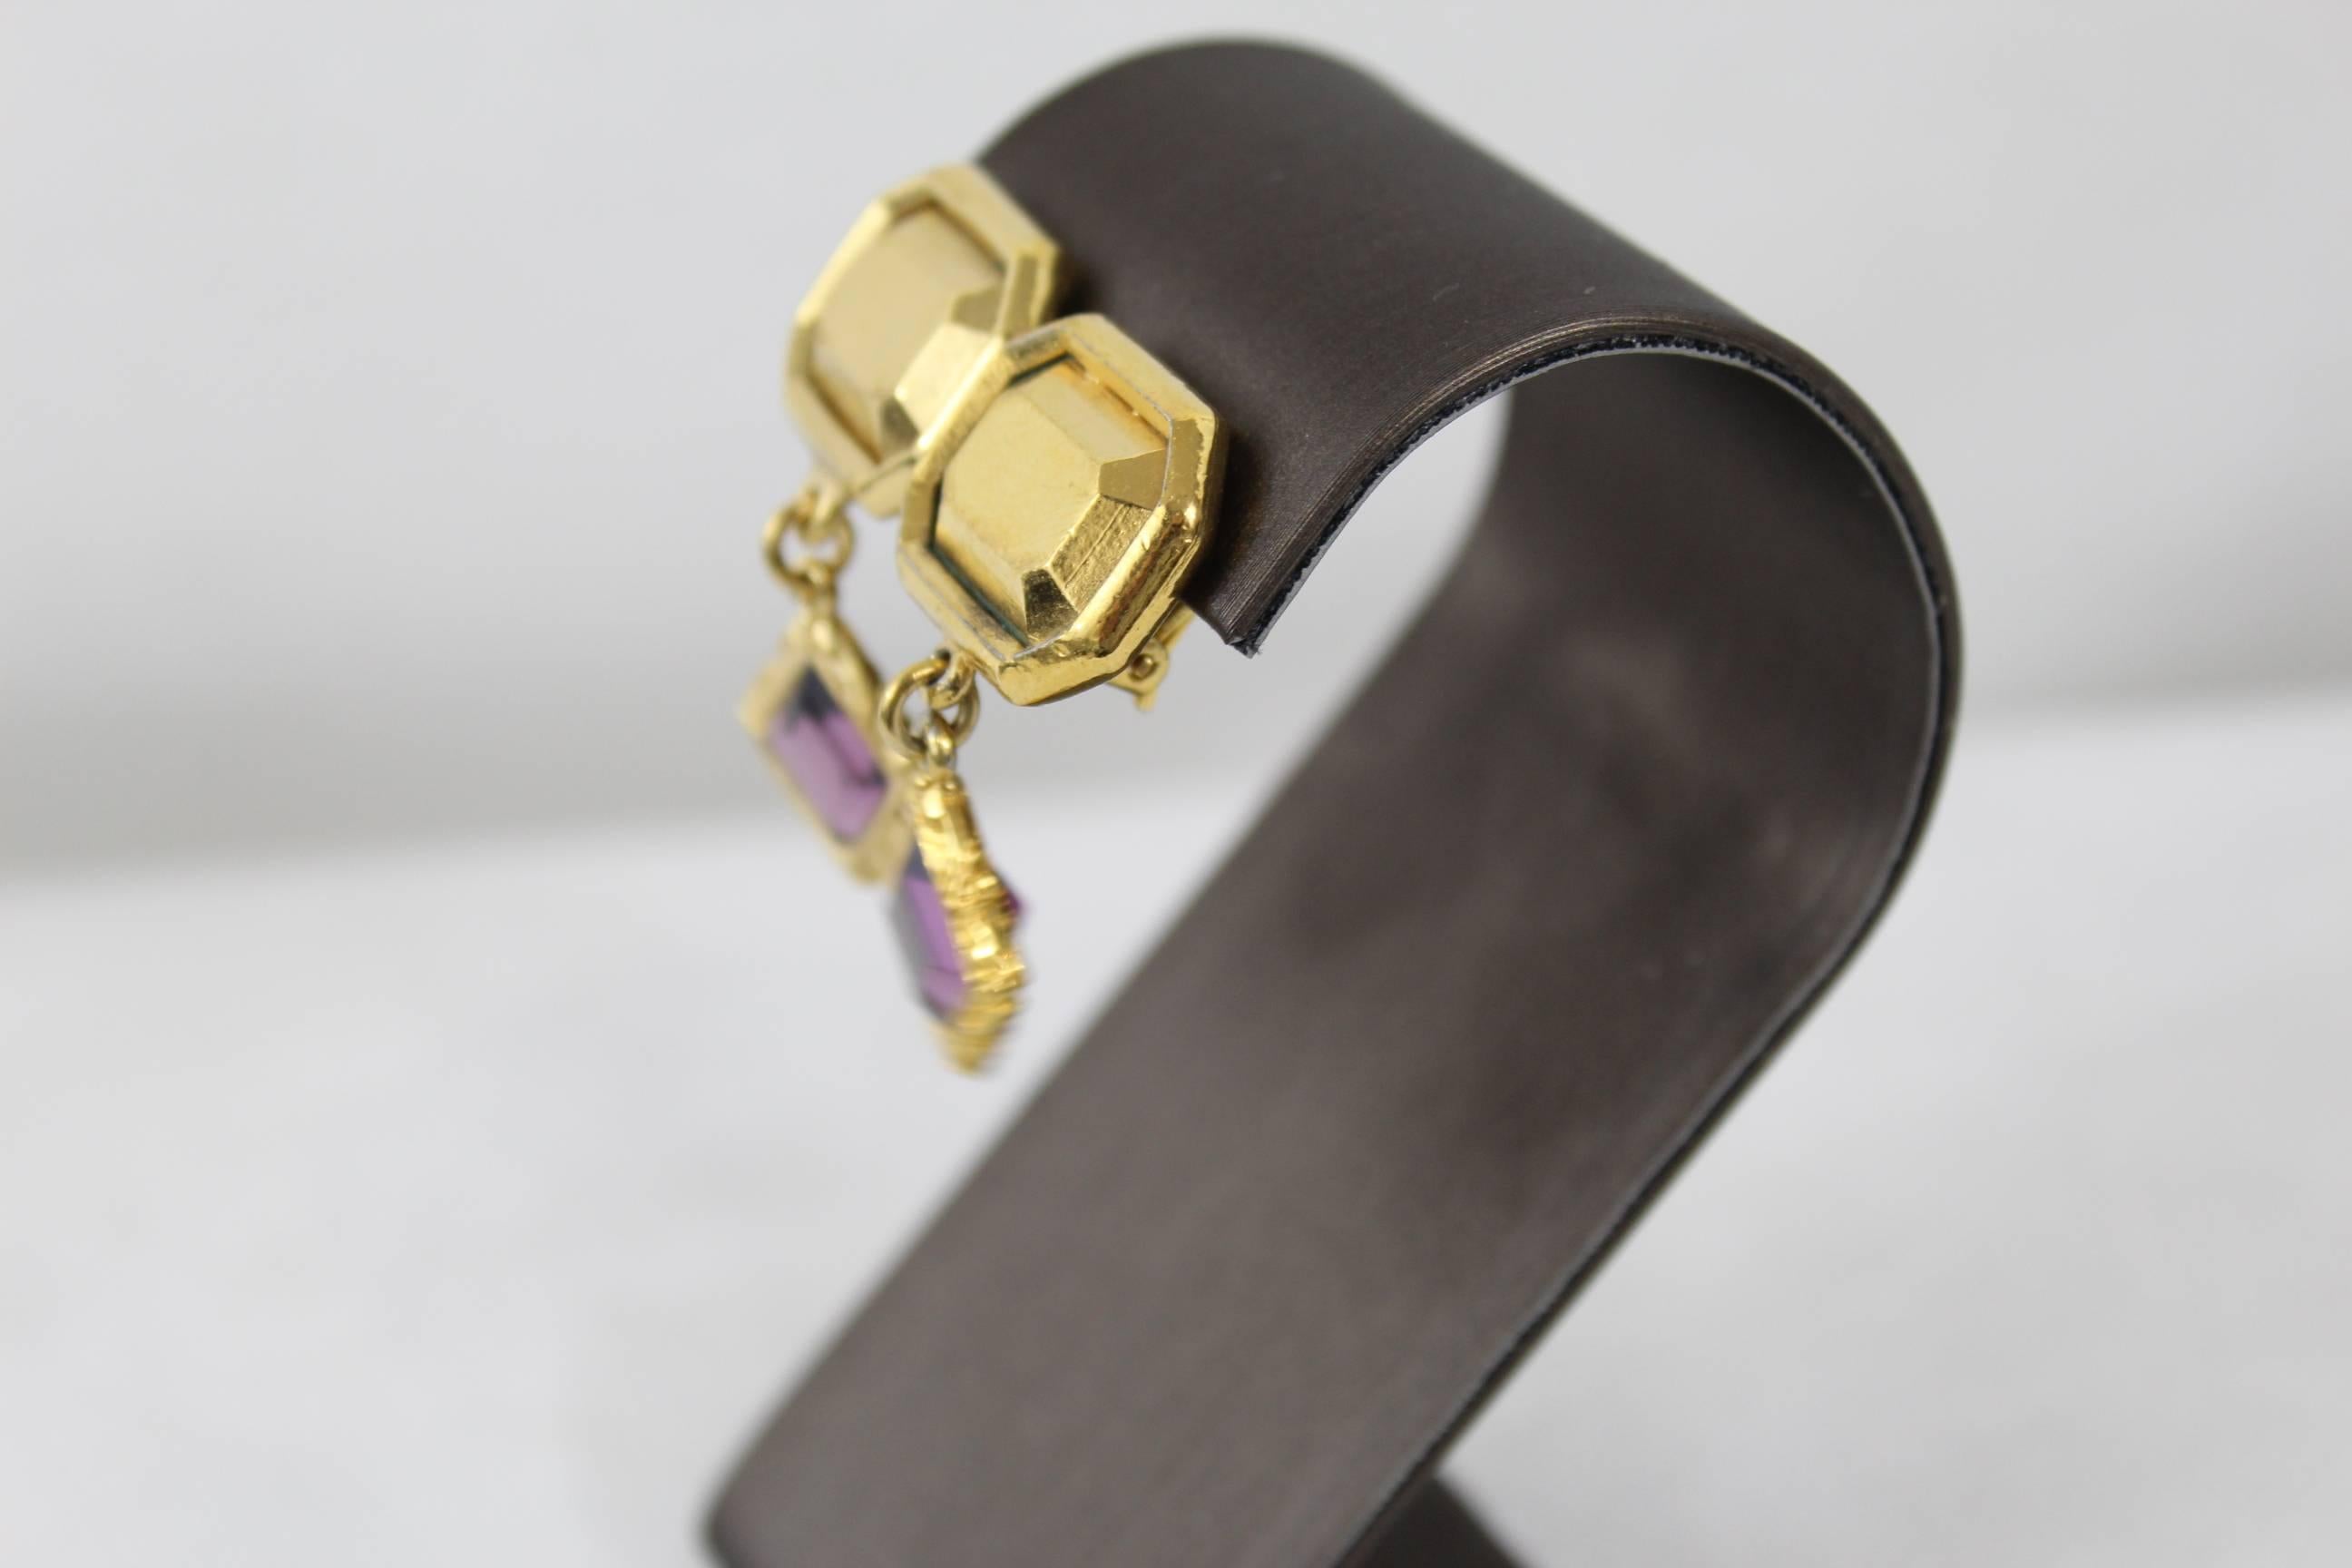 Really nice pair of YSL vintage earrings with purple stone.

Some signs of wear but overall nice condition
